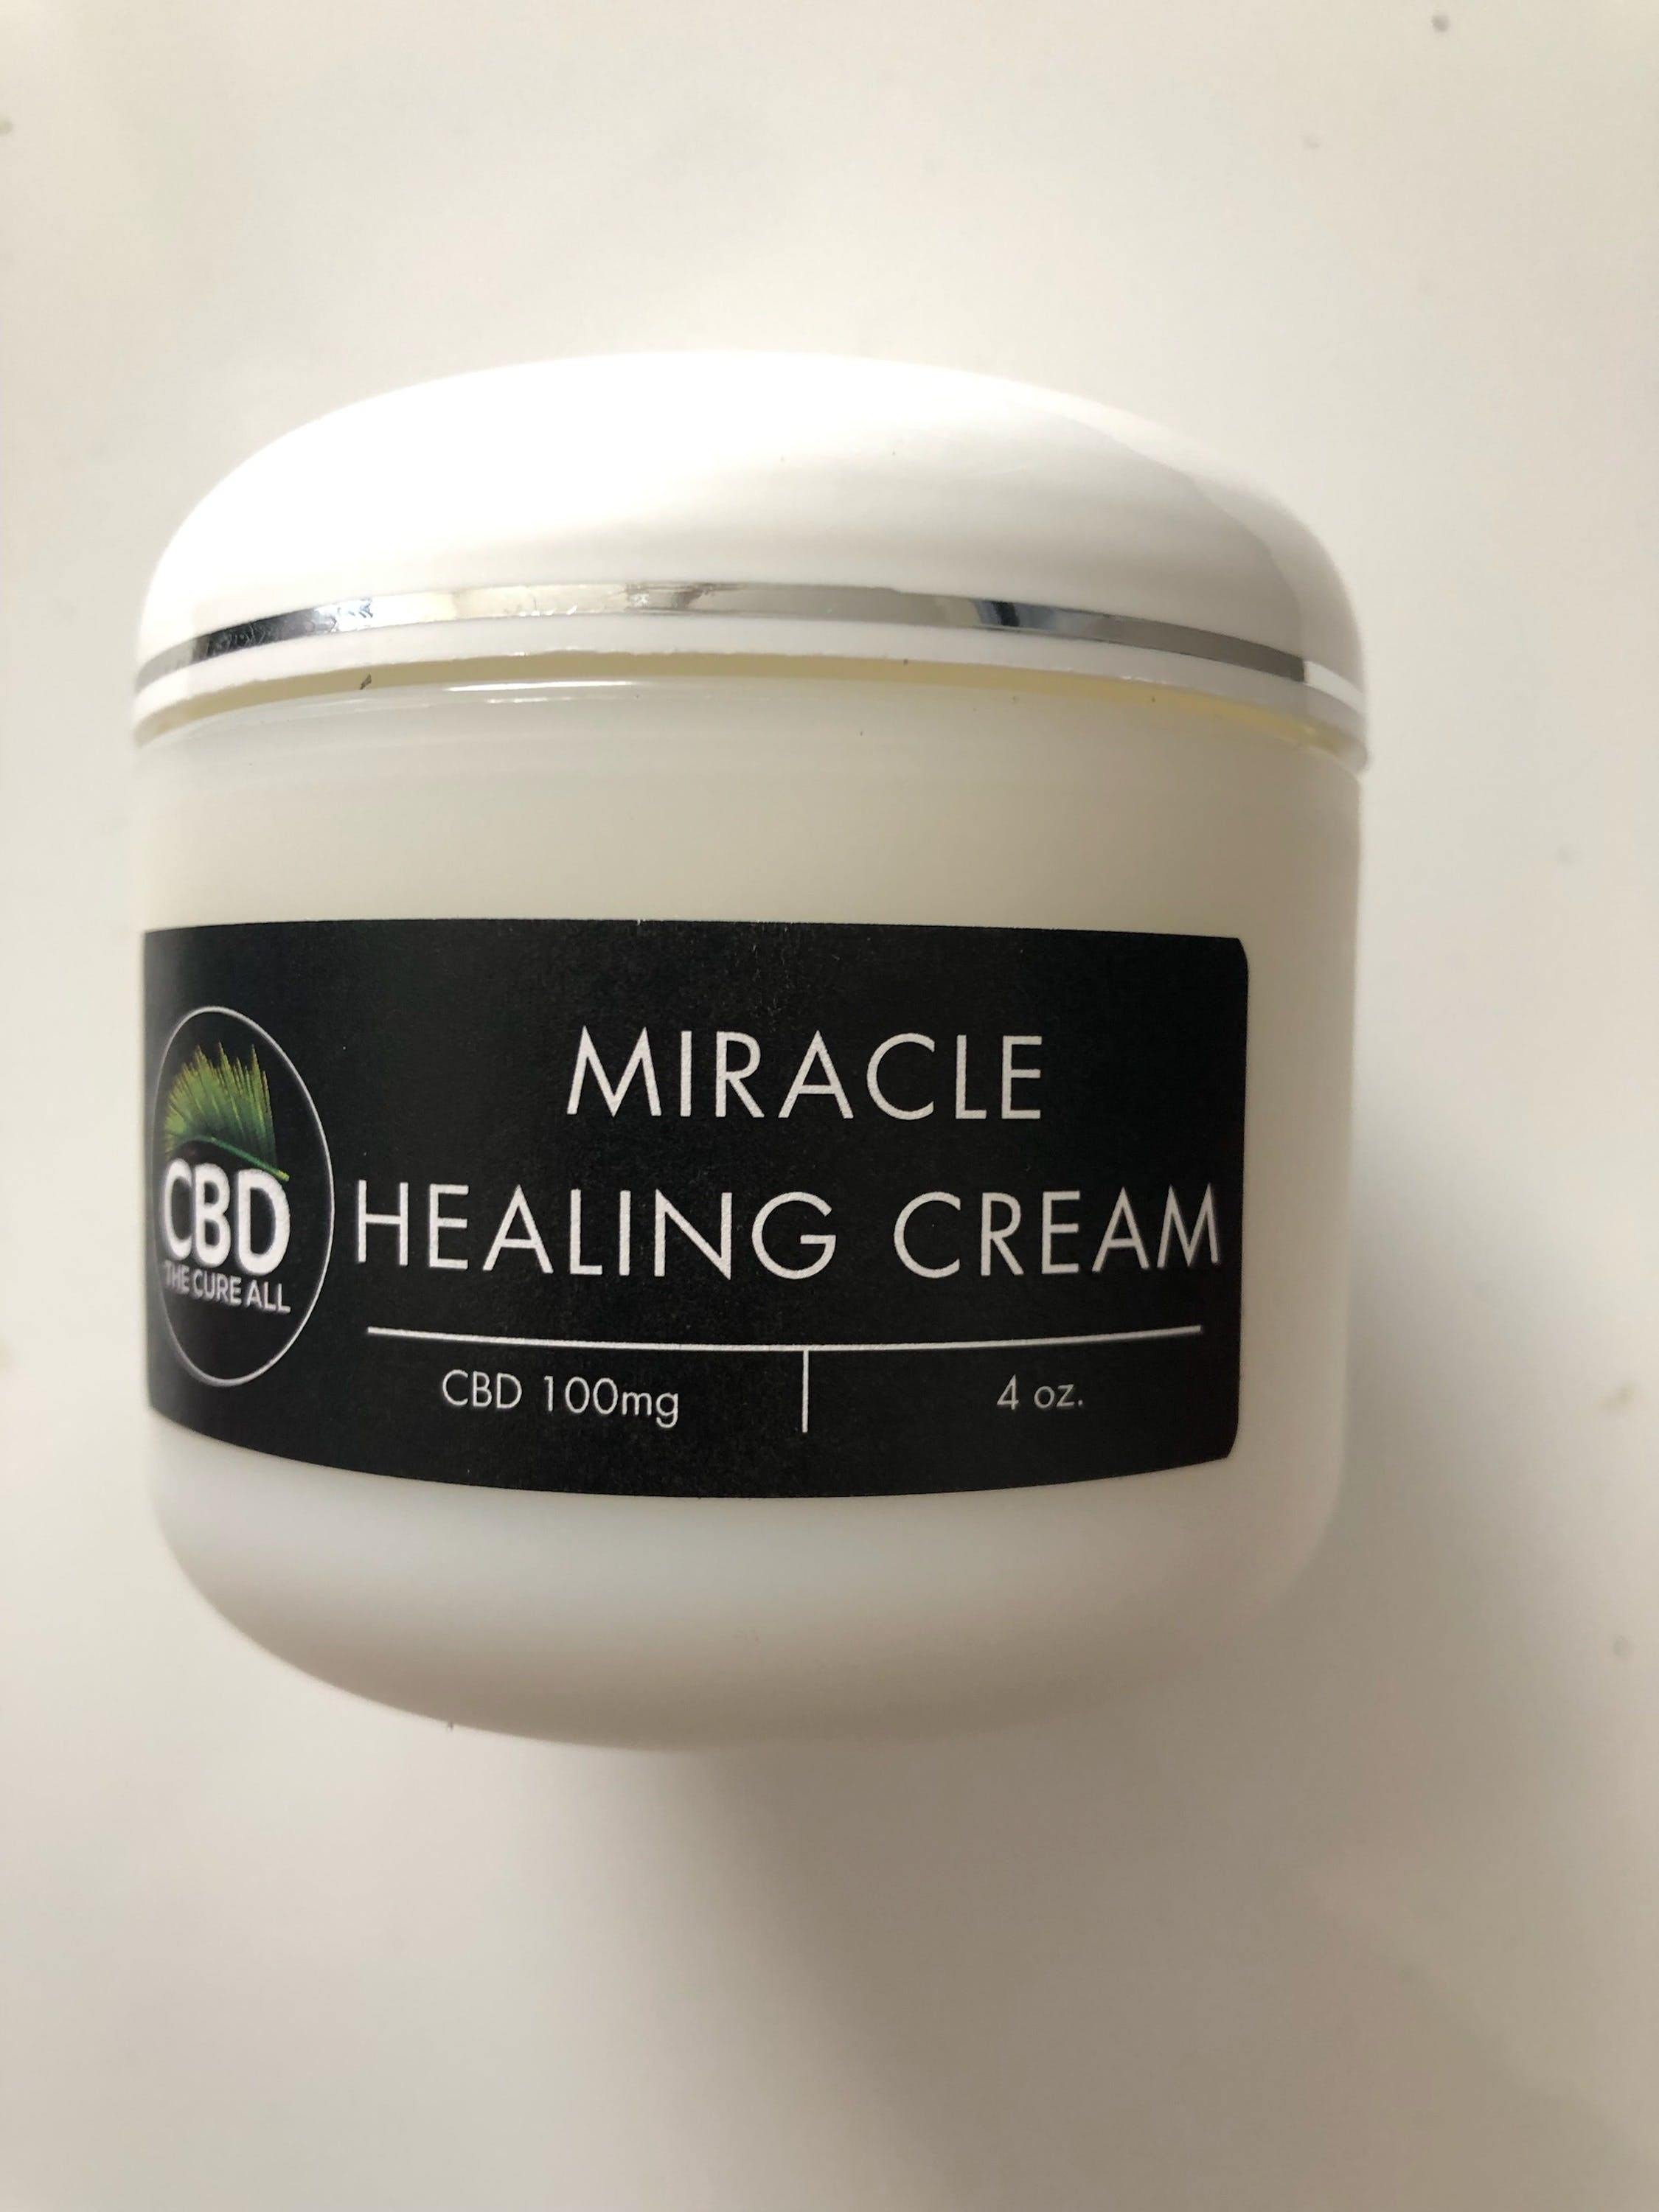 topicals-cbd-cure-all-miracle-healing-cream